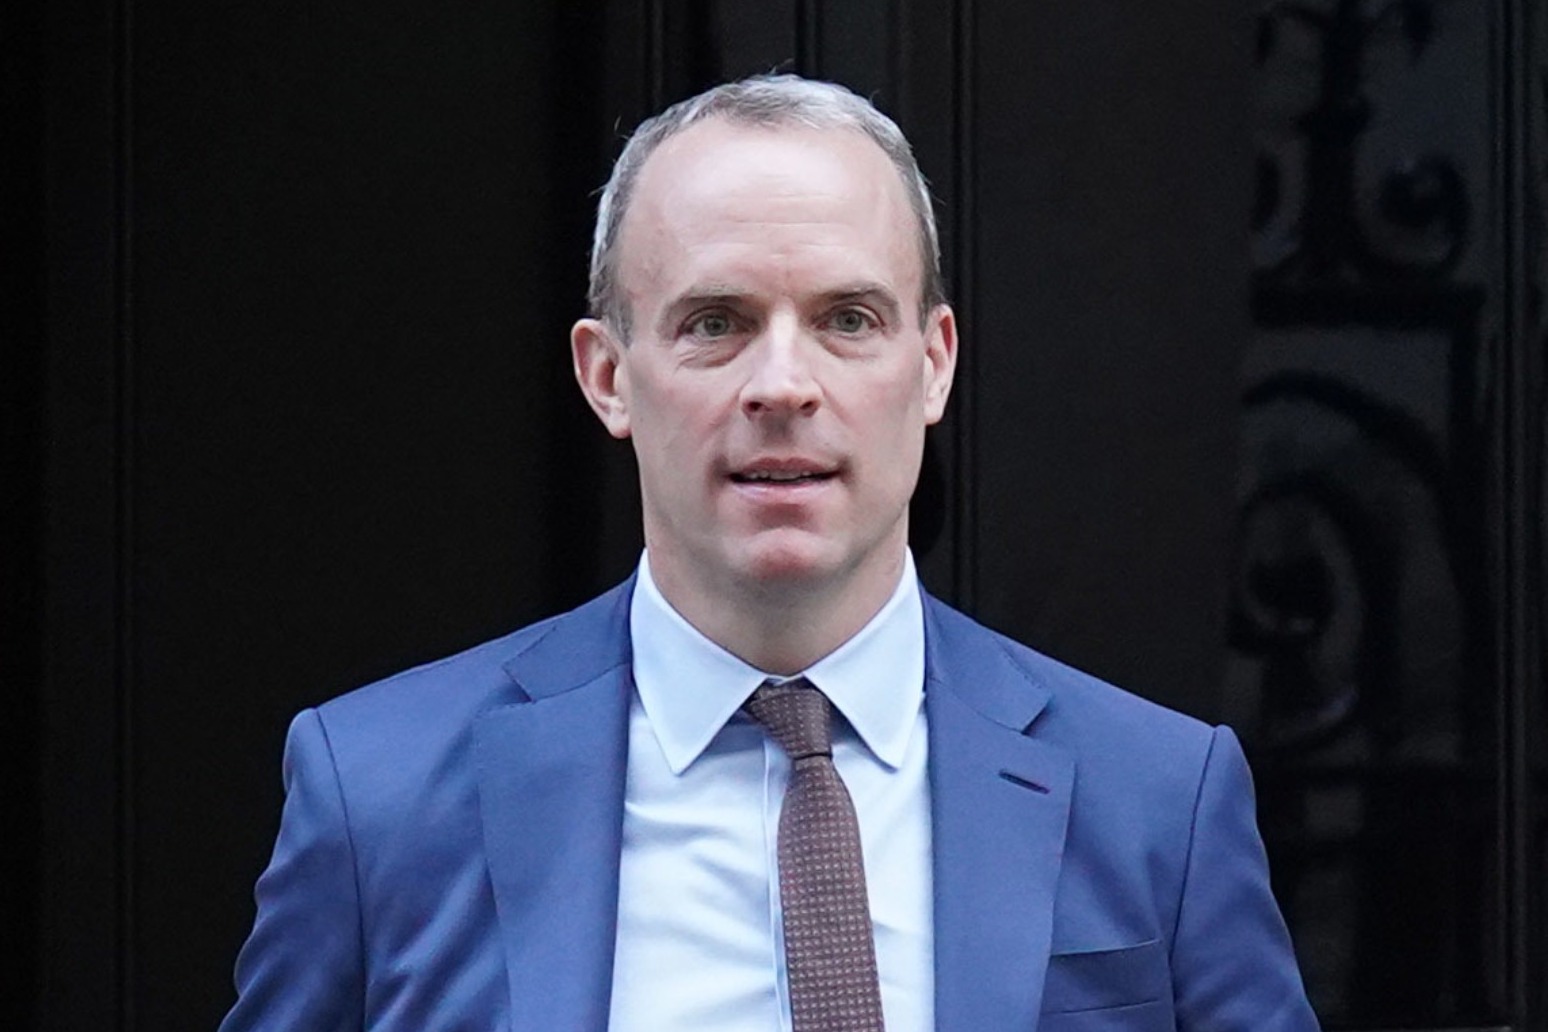 Prime Minister appoints leading KC to investigate bullying claims against Dominic Raab 